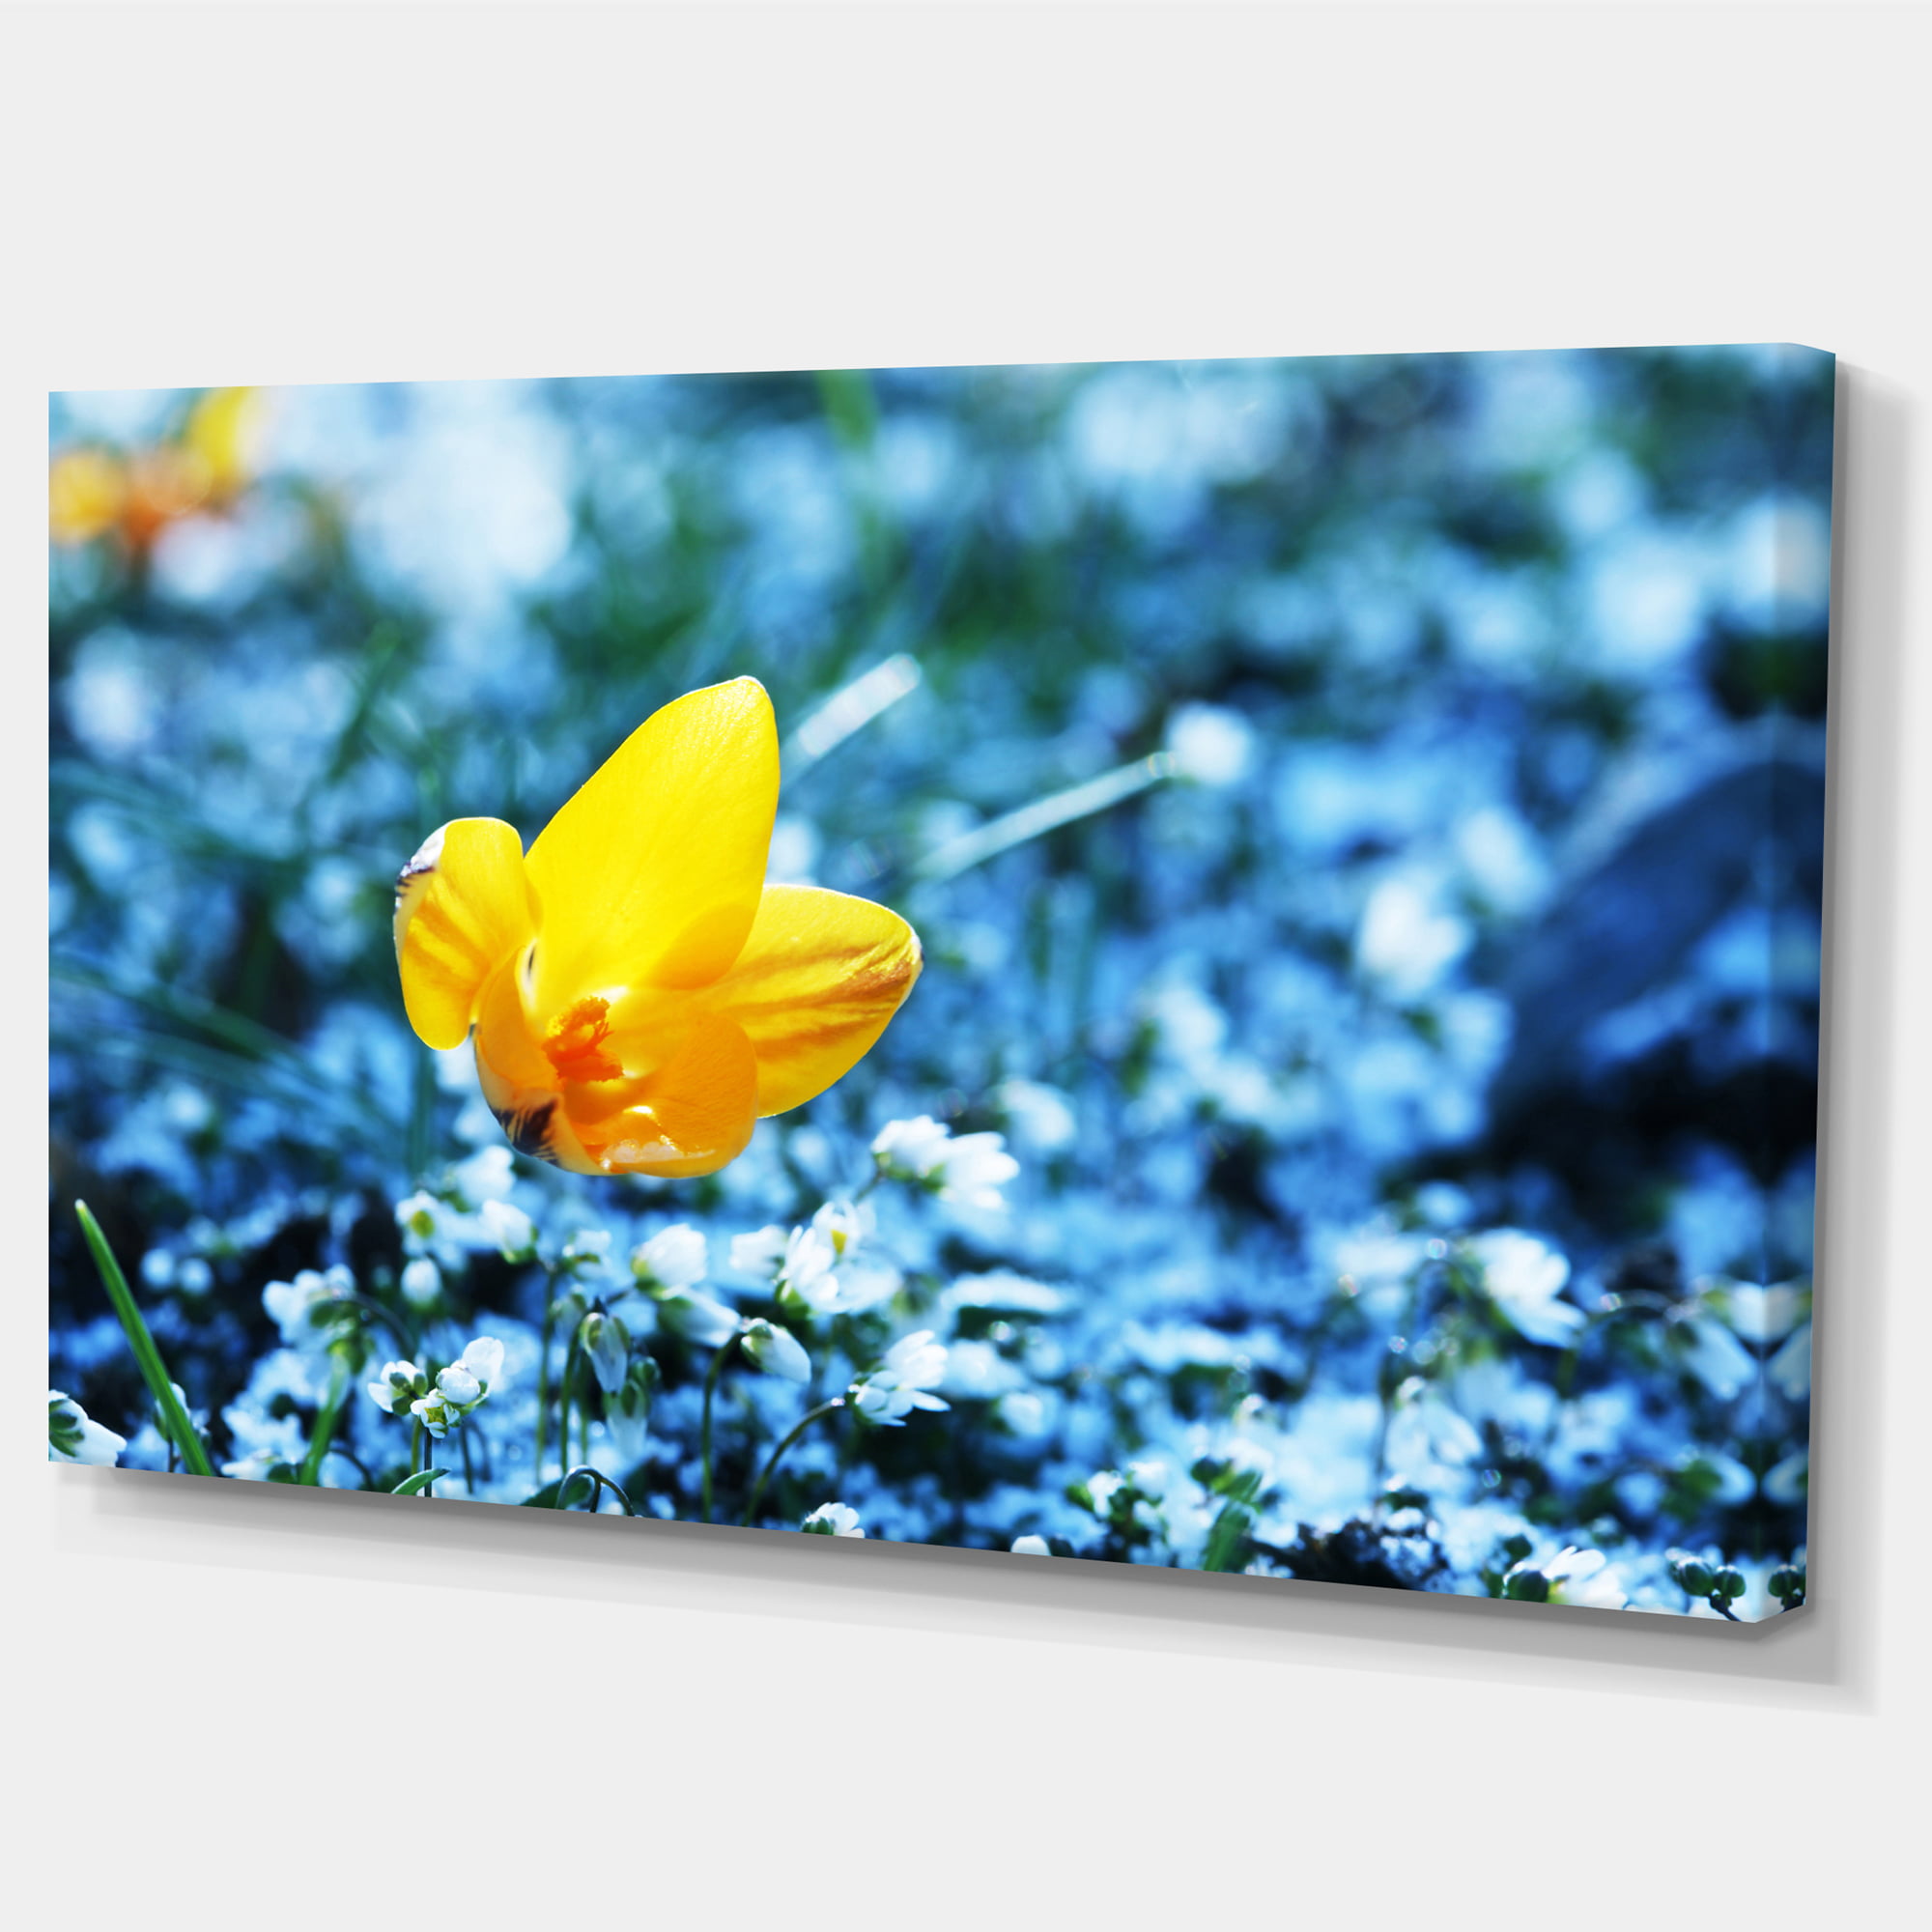 Beautiful Yellow Flower on Blue - Floral Art Canvas Print